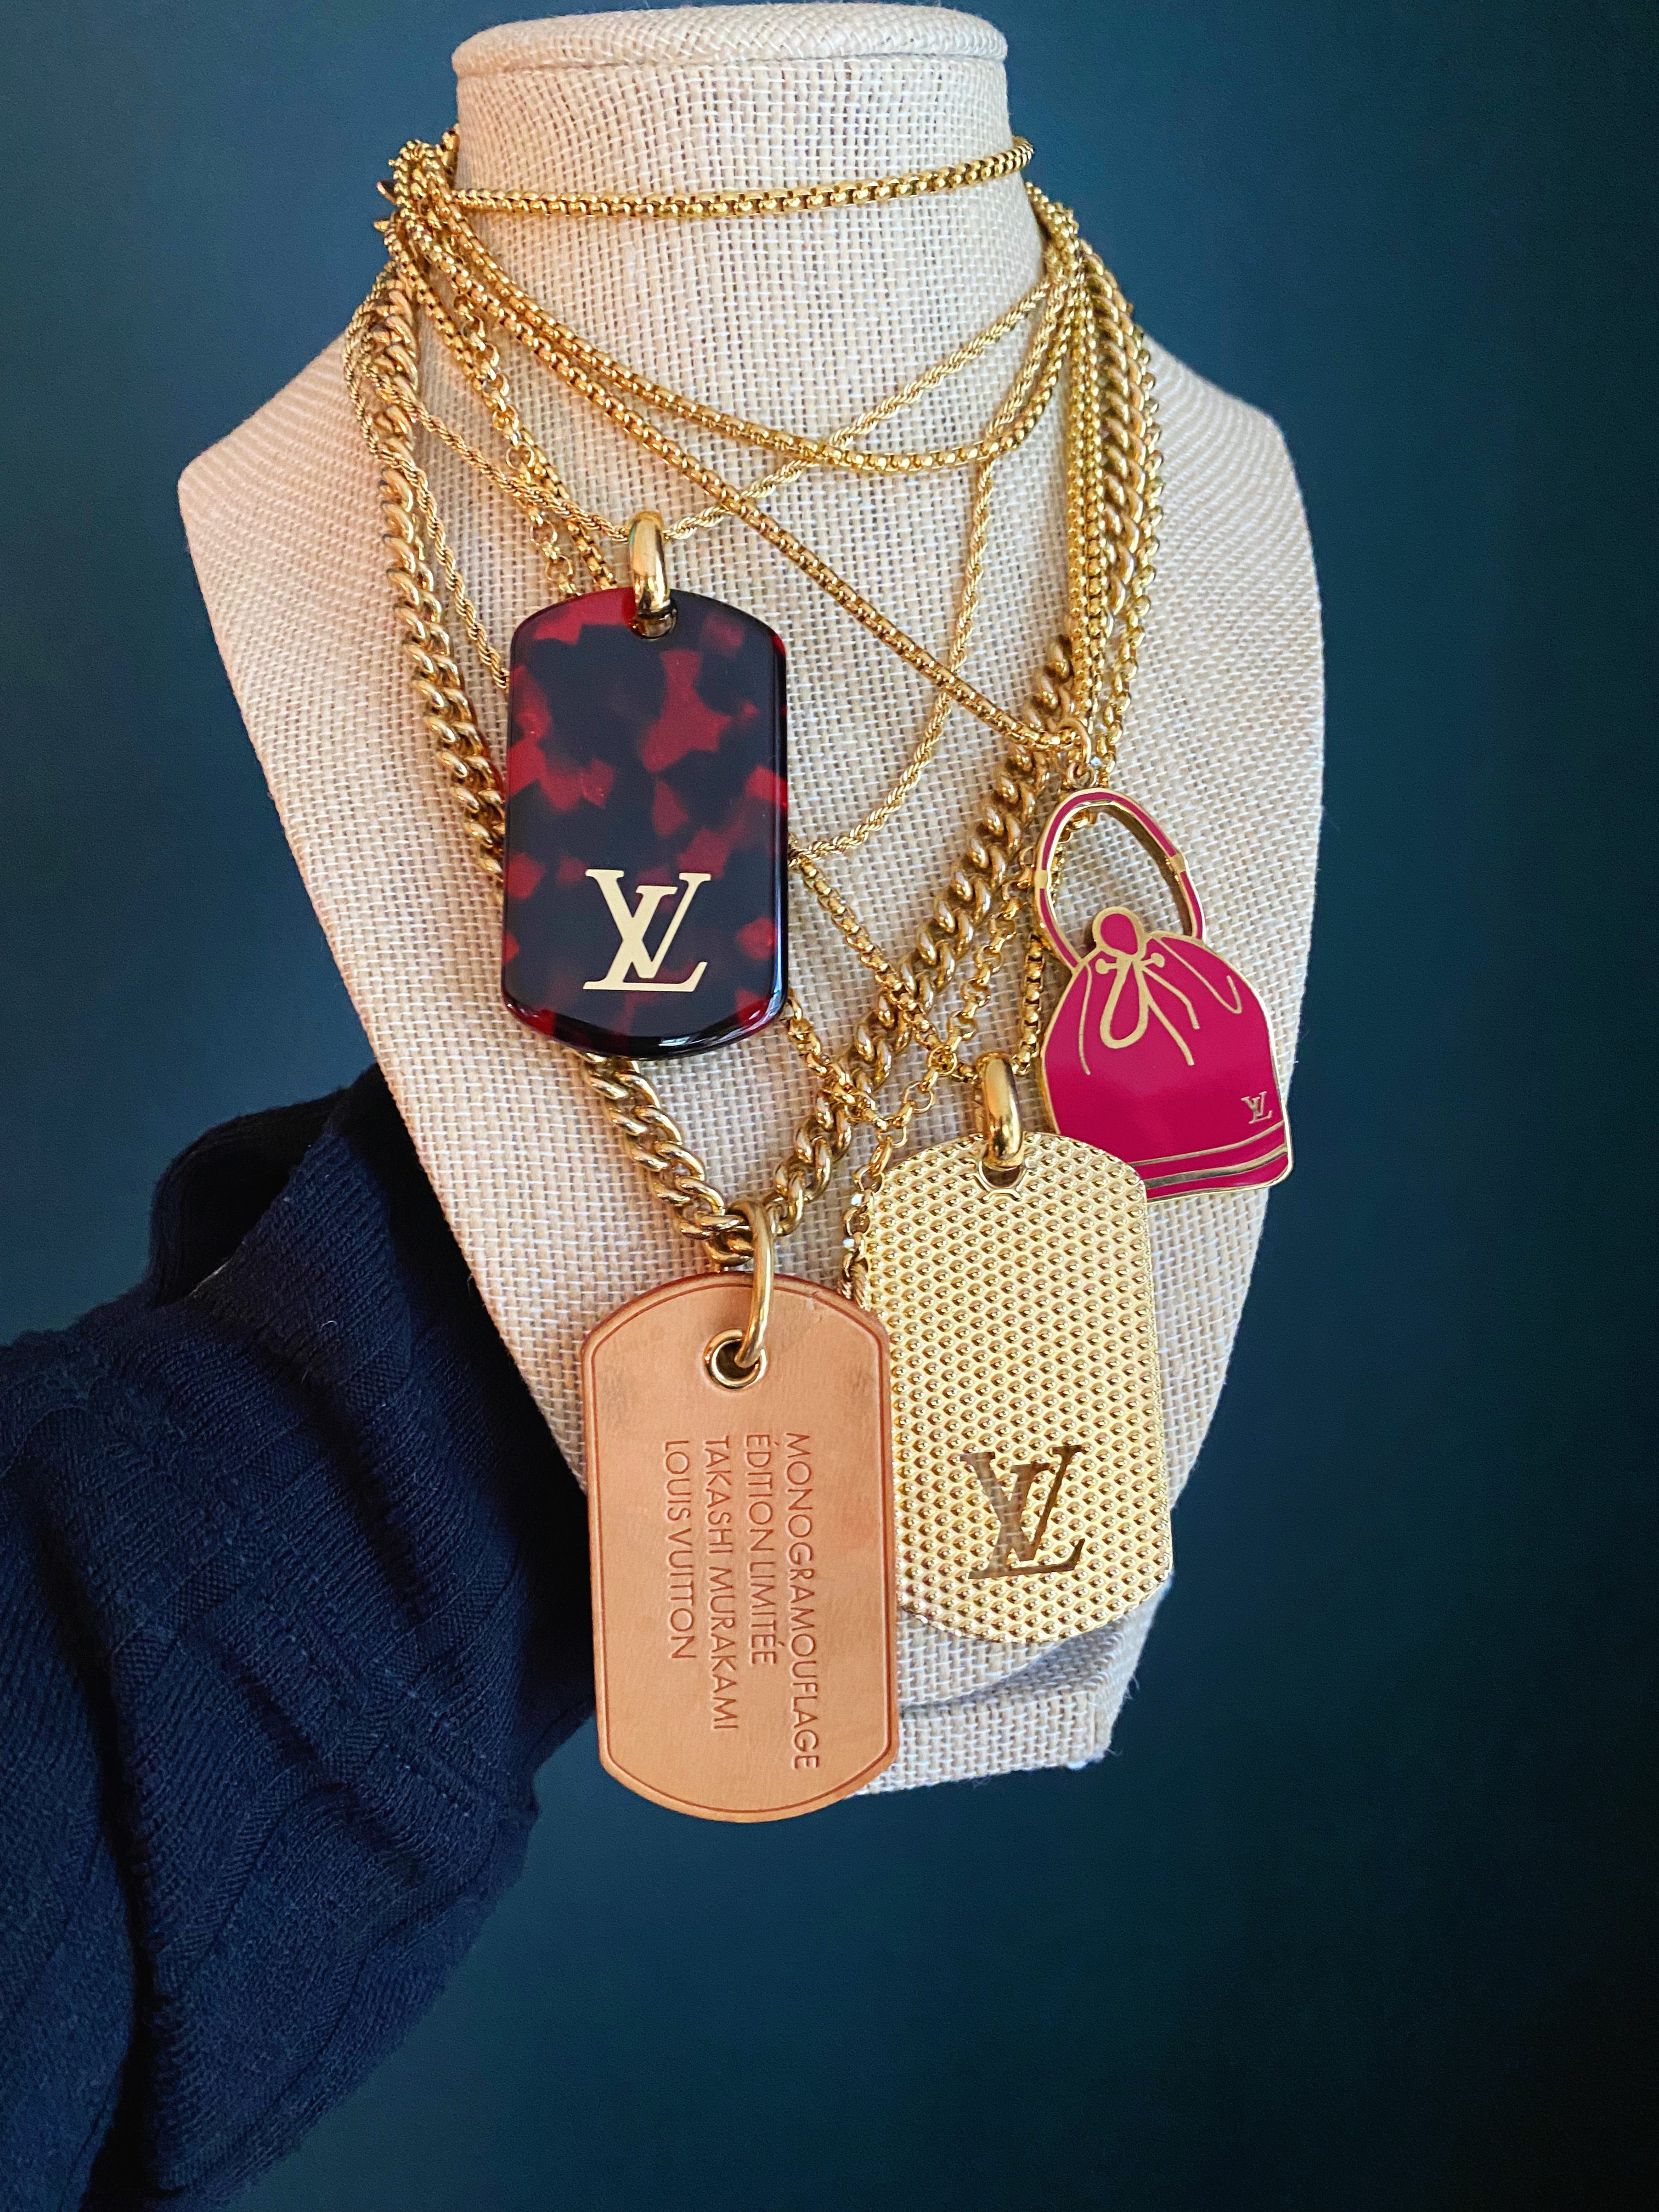 vuitton dog tag necklace gold